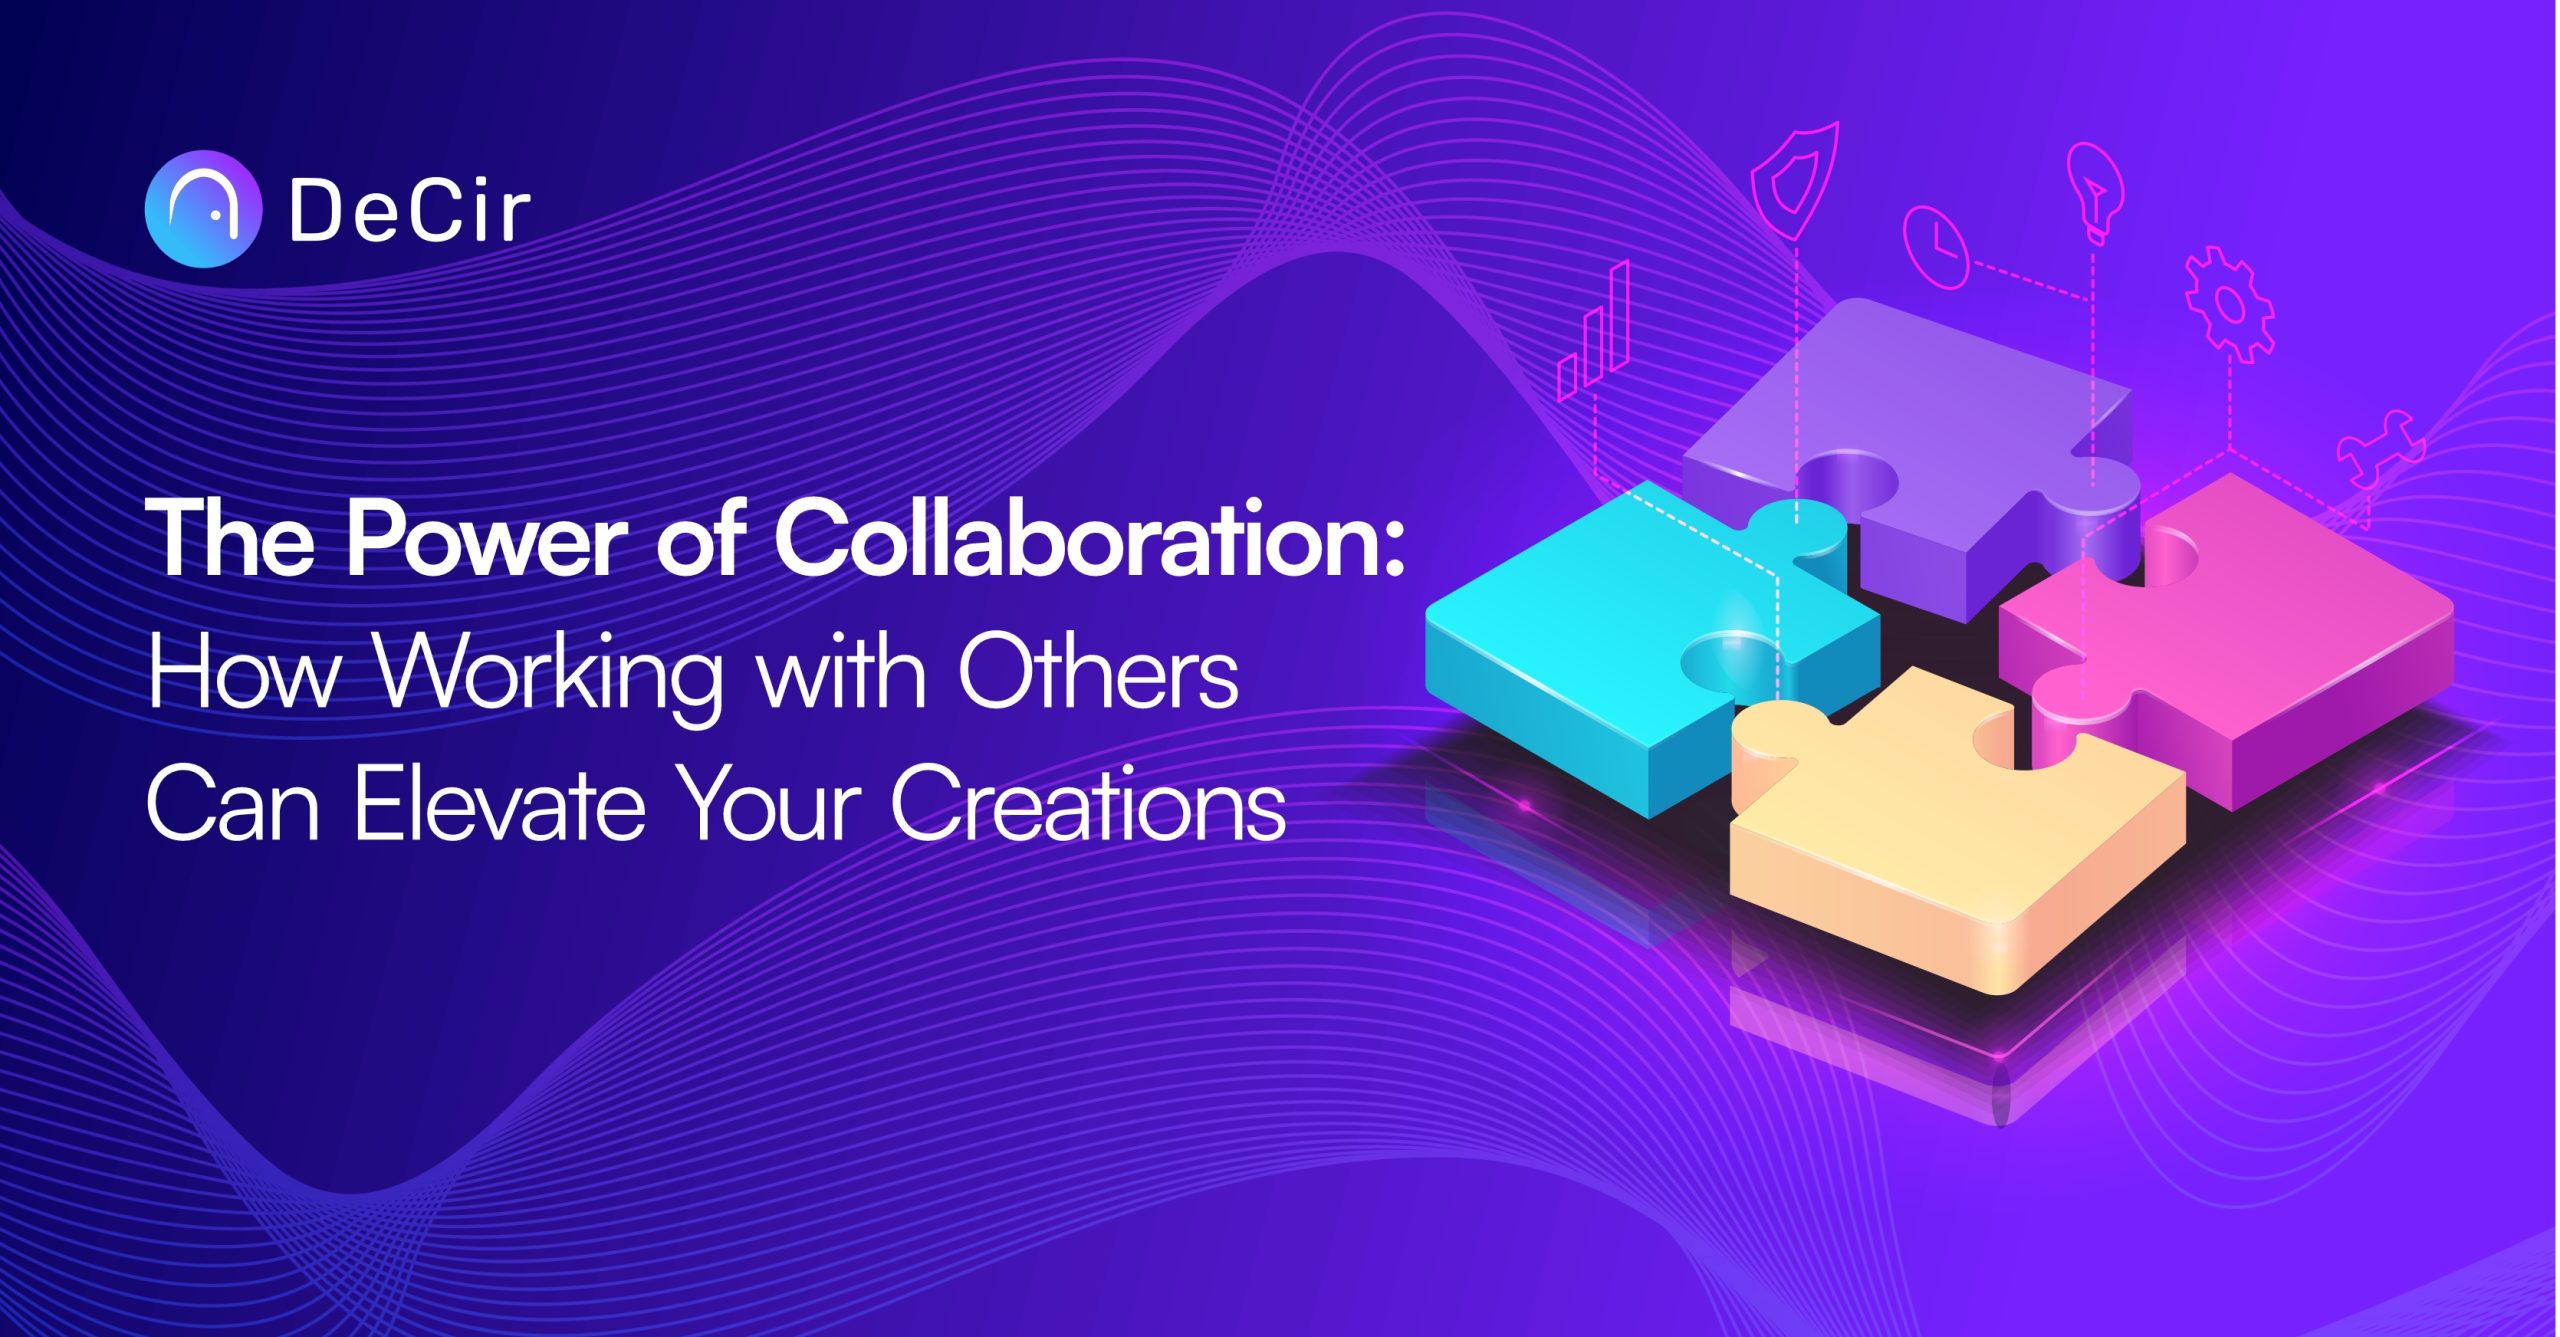 How working with others can elevate your creativity